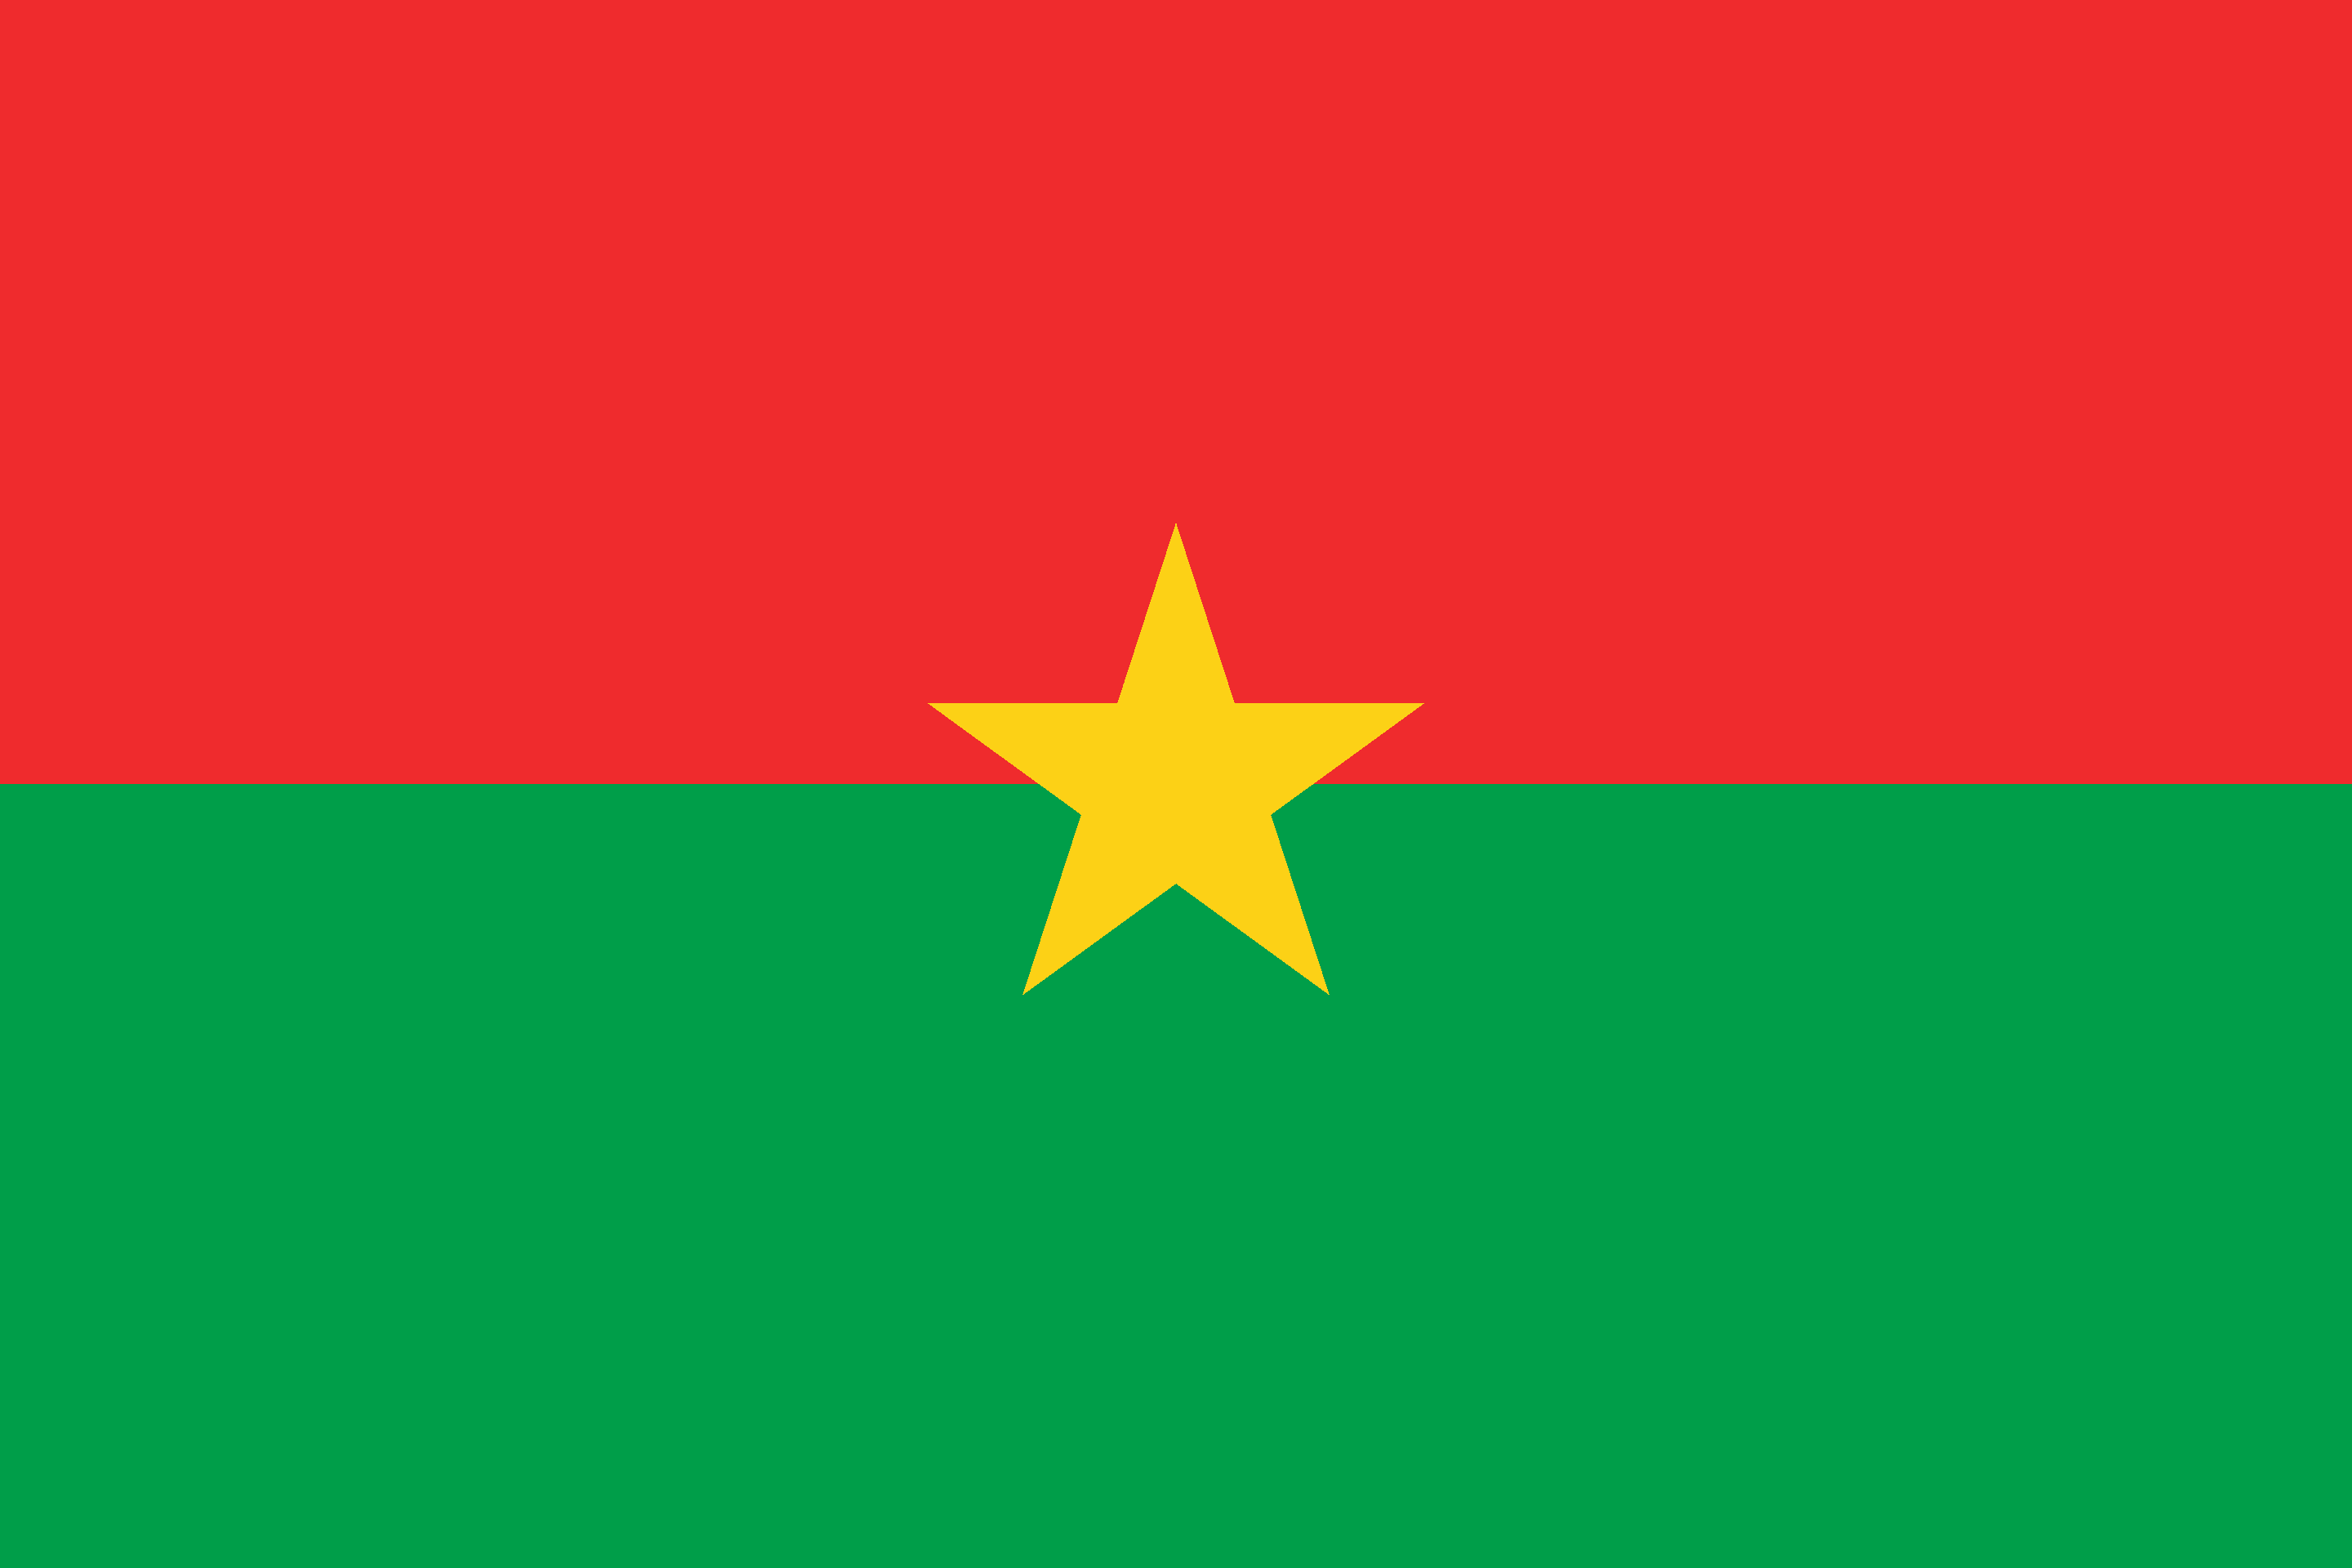 Facts about Burkina Faso